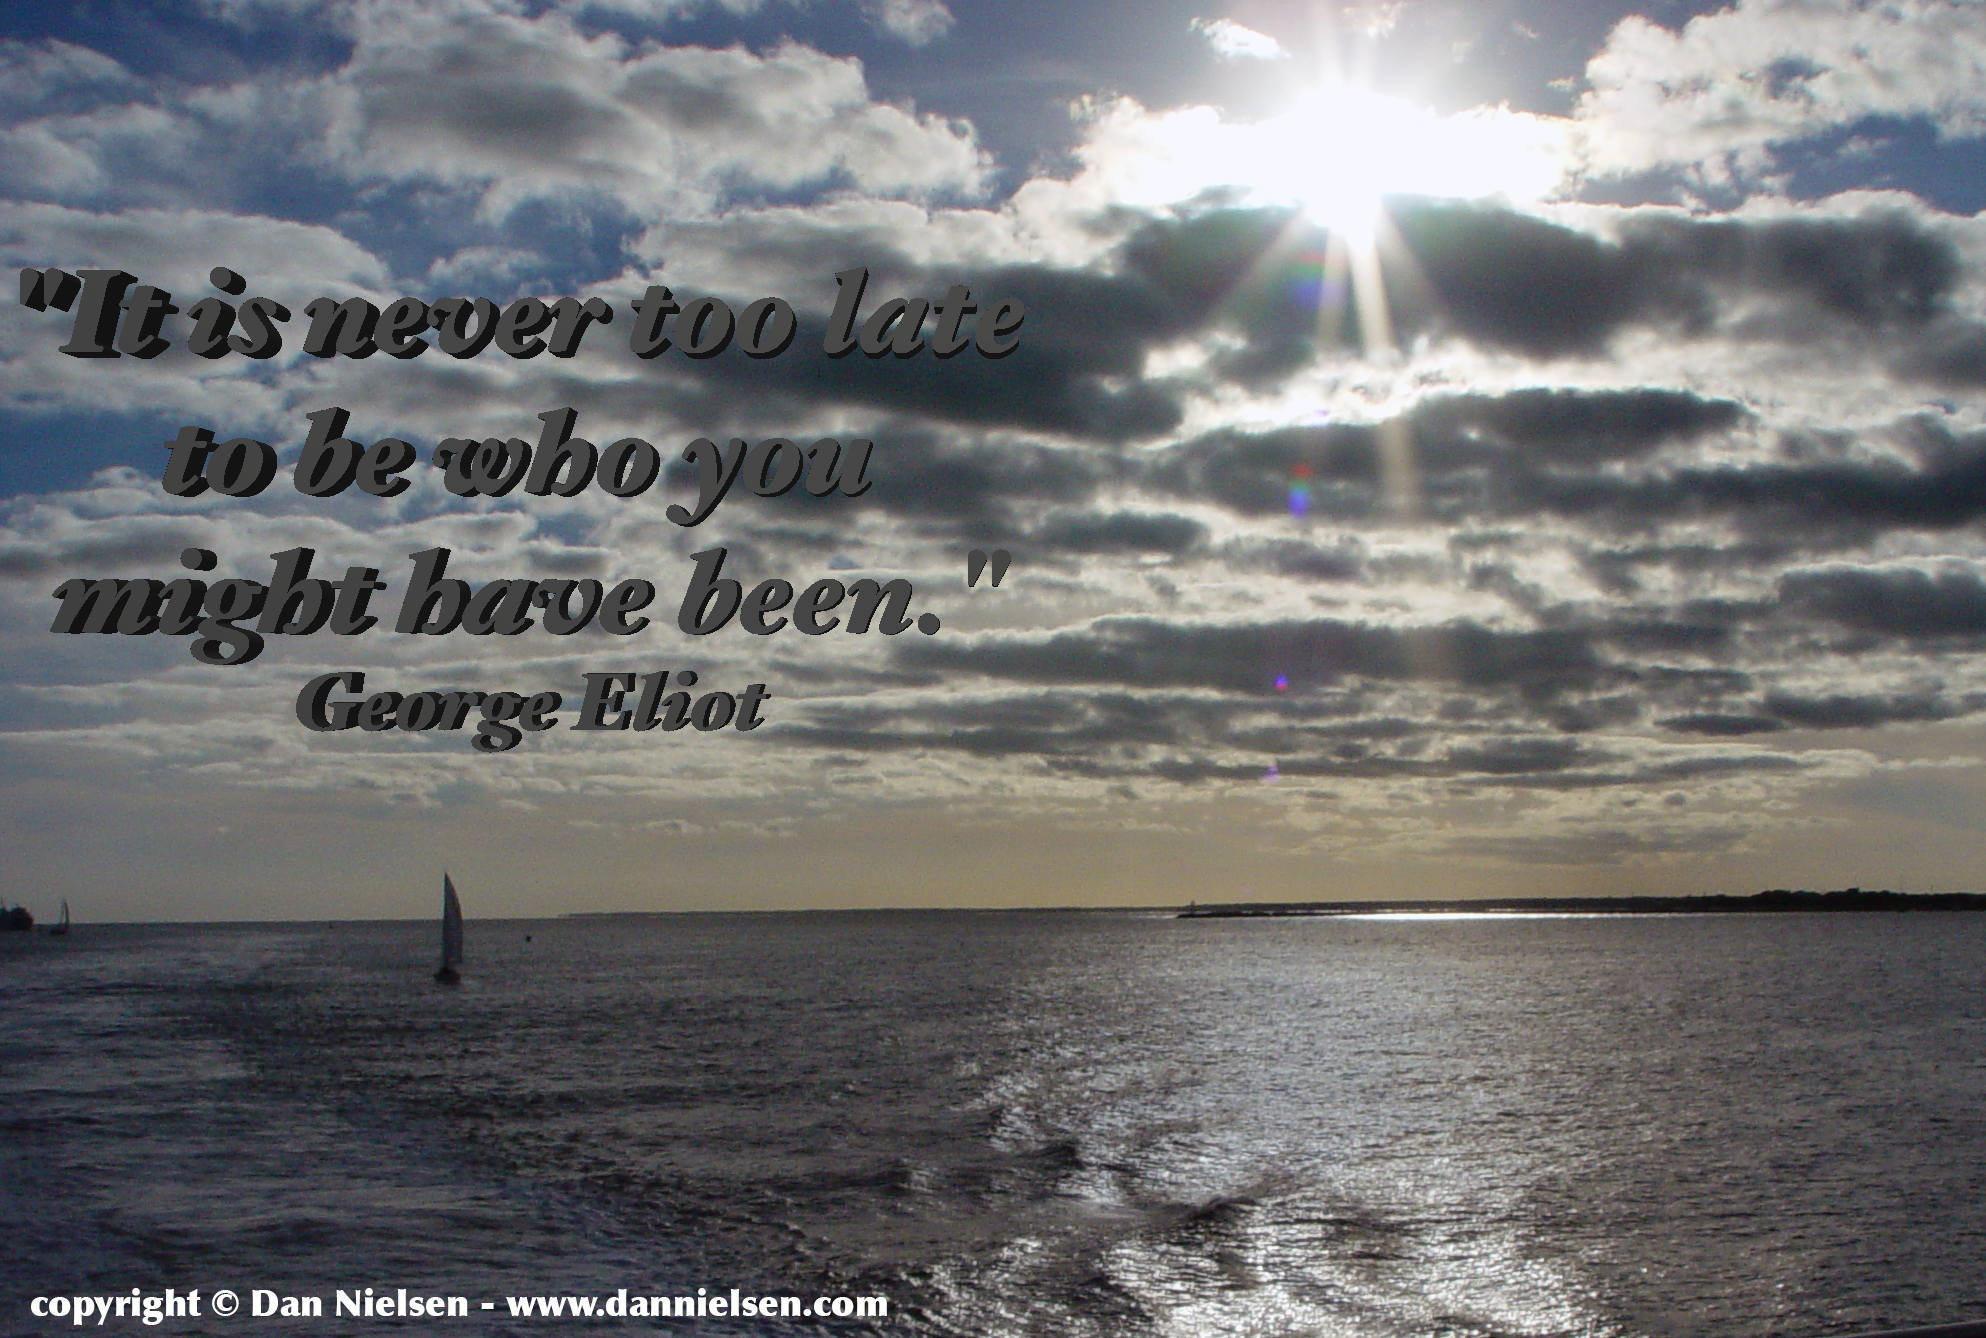 "It is never too late to be who you might have been." ~ George Eliot